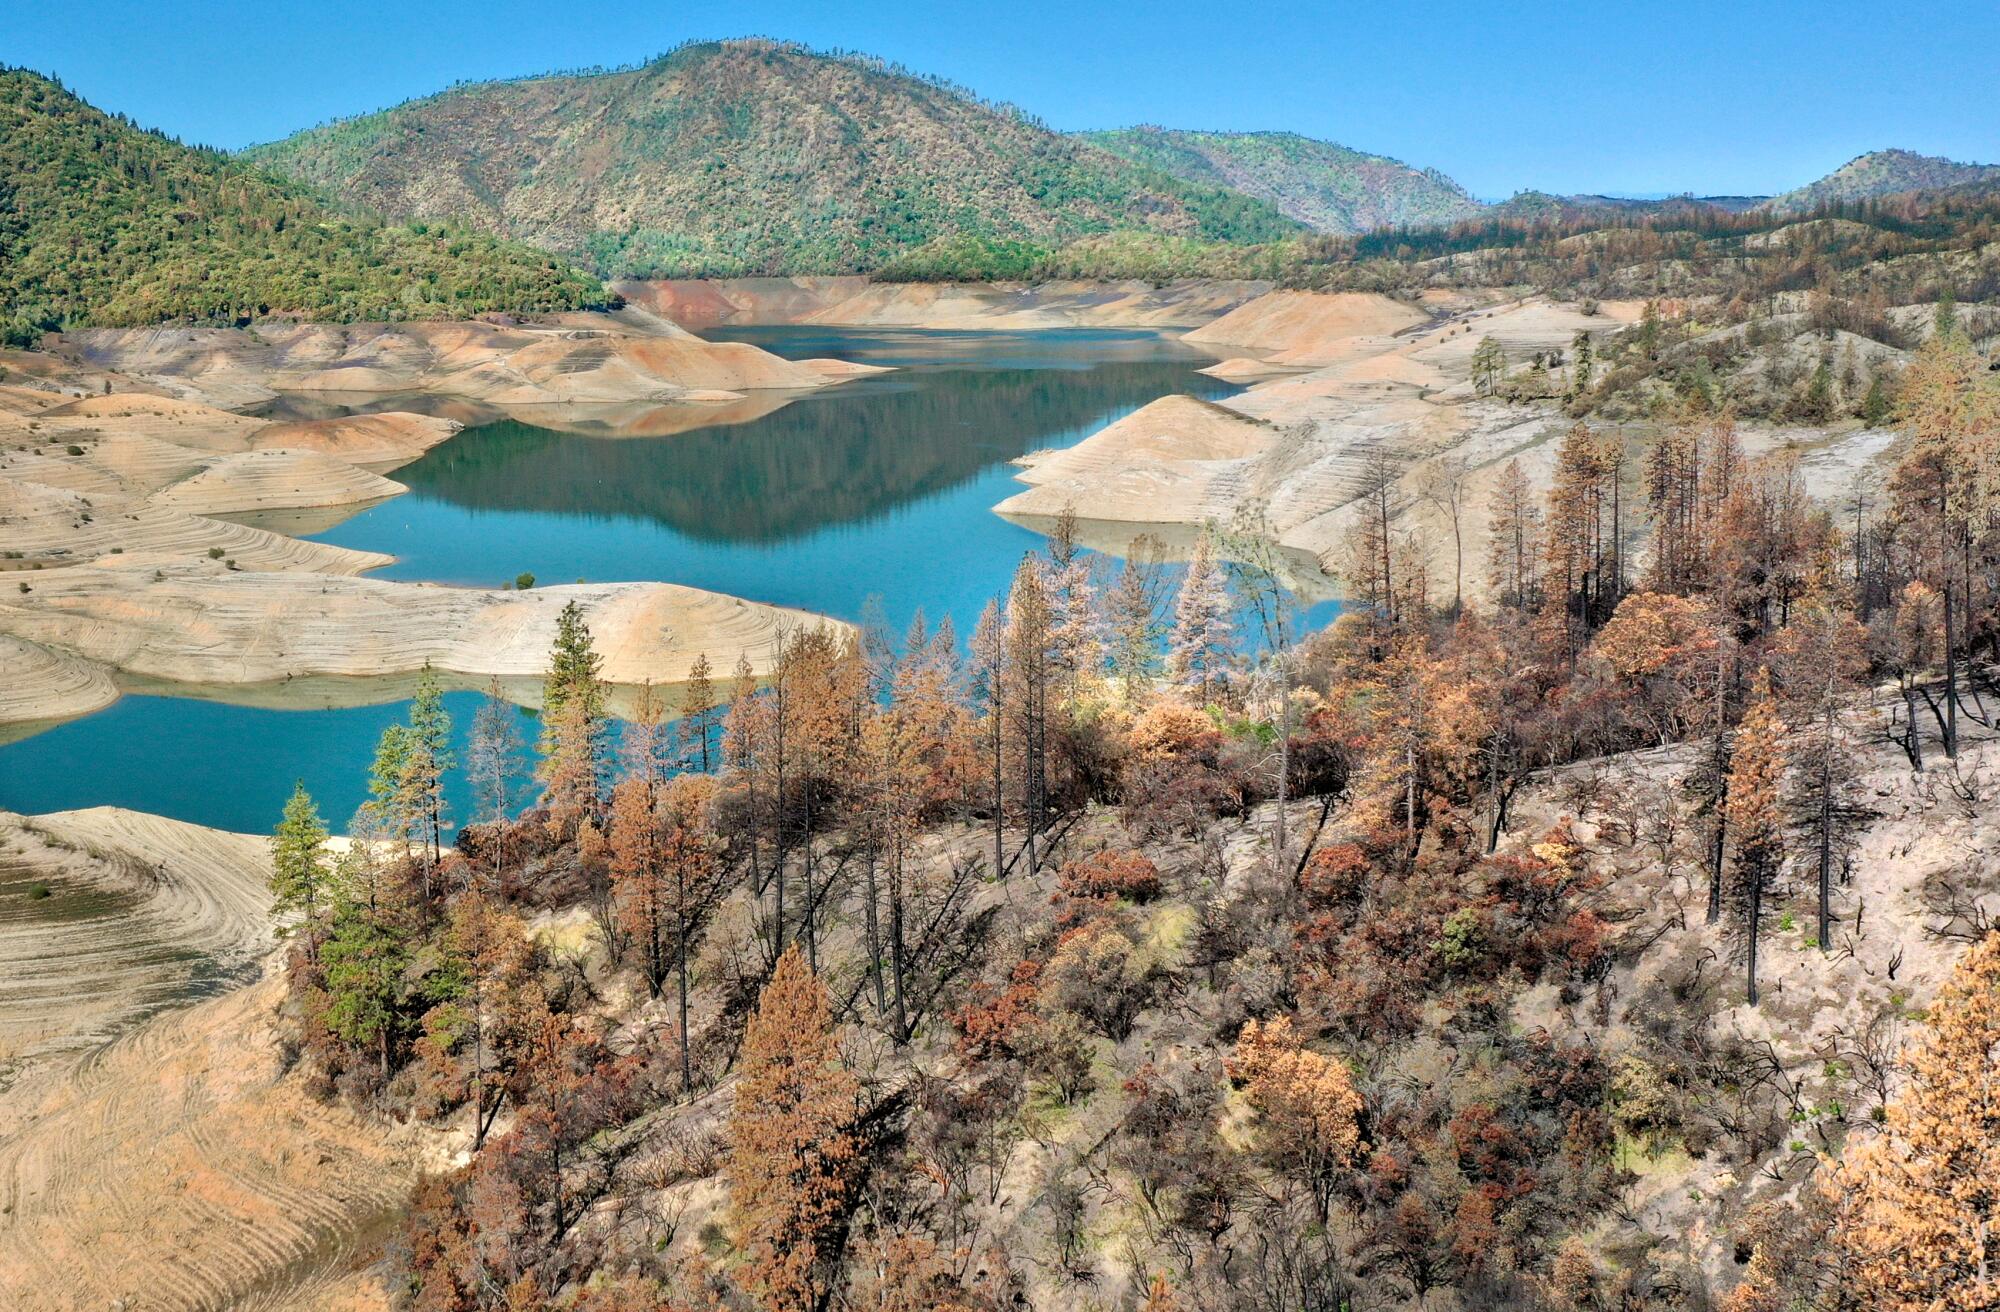 Trees burned by the recent Bear fire line the steep banks of Lake Oroville